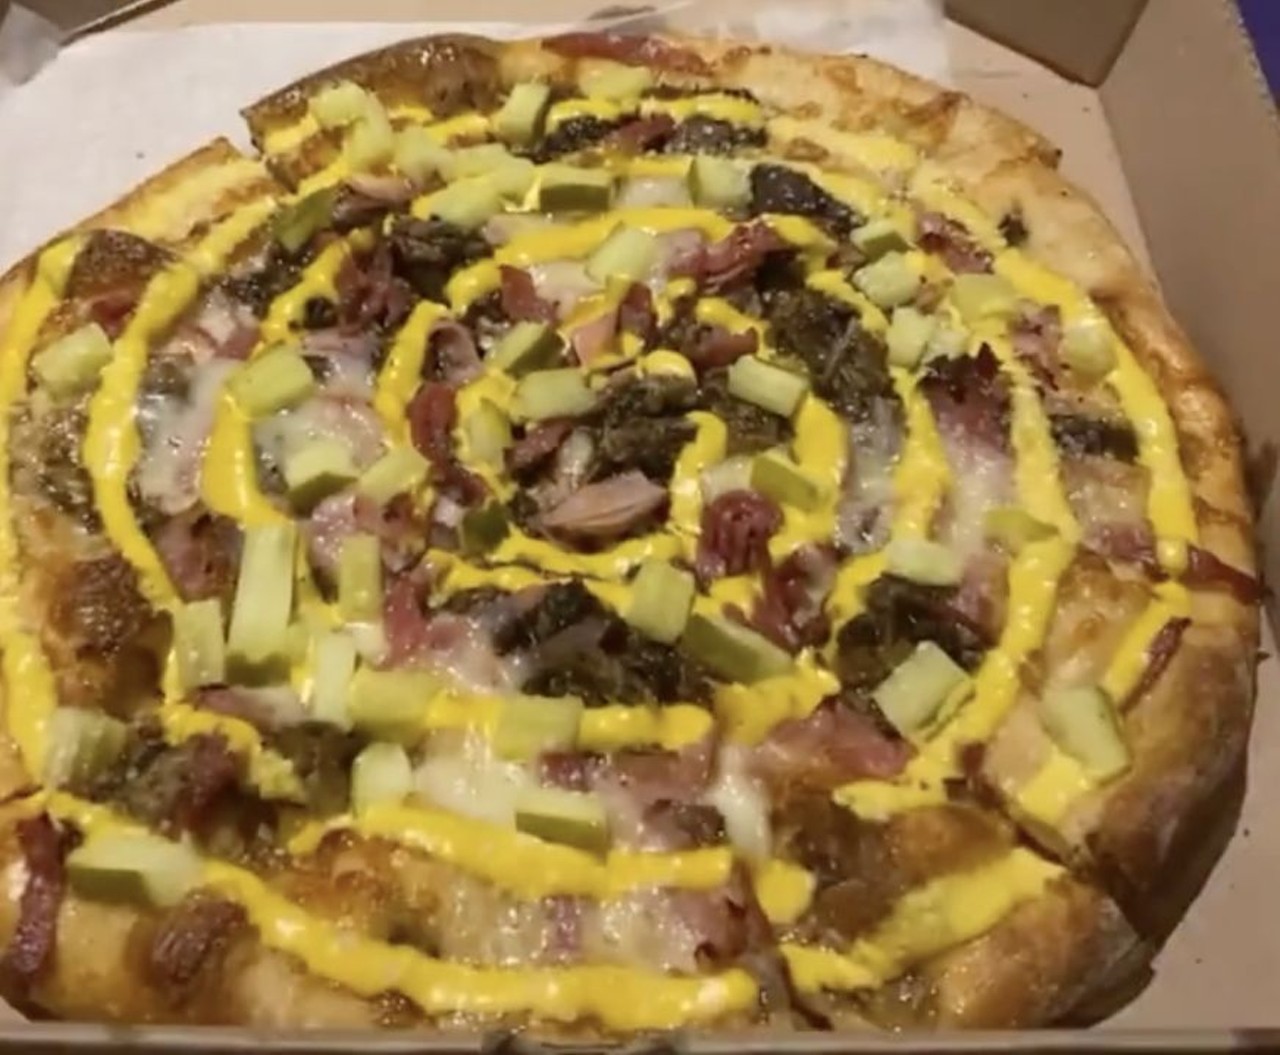 The Wild in Havana Mellow Mushroom, multiple locations Mellow Mushroom takes the concept of the Cuban Slice to another whole level Tampa-style with the Wild in Havana, a pizza topped with jerk-marinated pork, ham, salami and a mayo-mustard drizzle.
Photo via Mellow Mushroom/Instagram